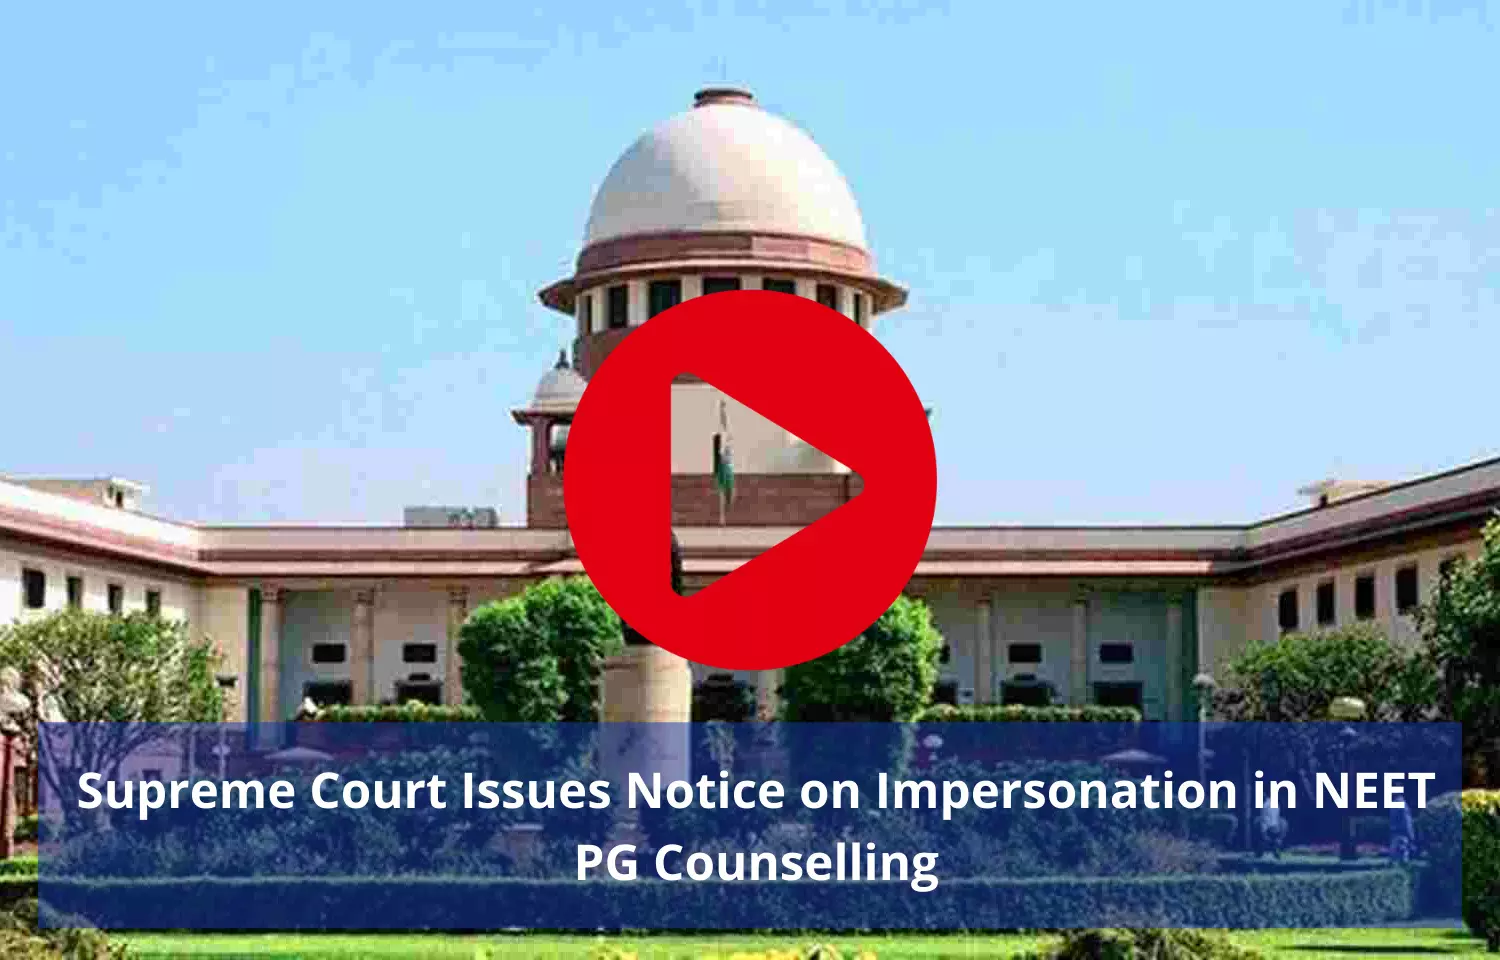 SC issues notice on impersonation in NEET PG Counselling